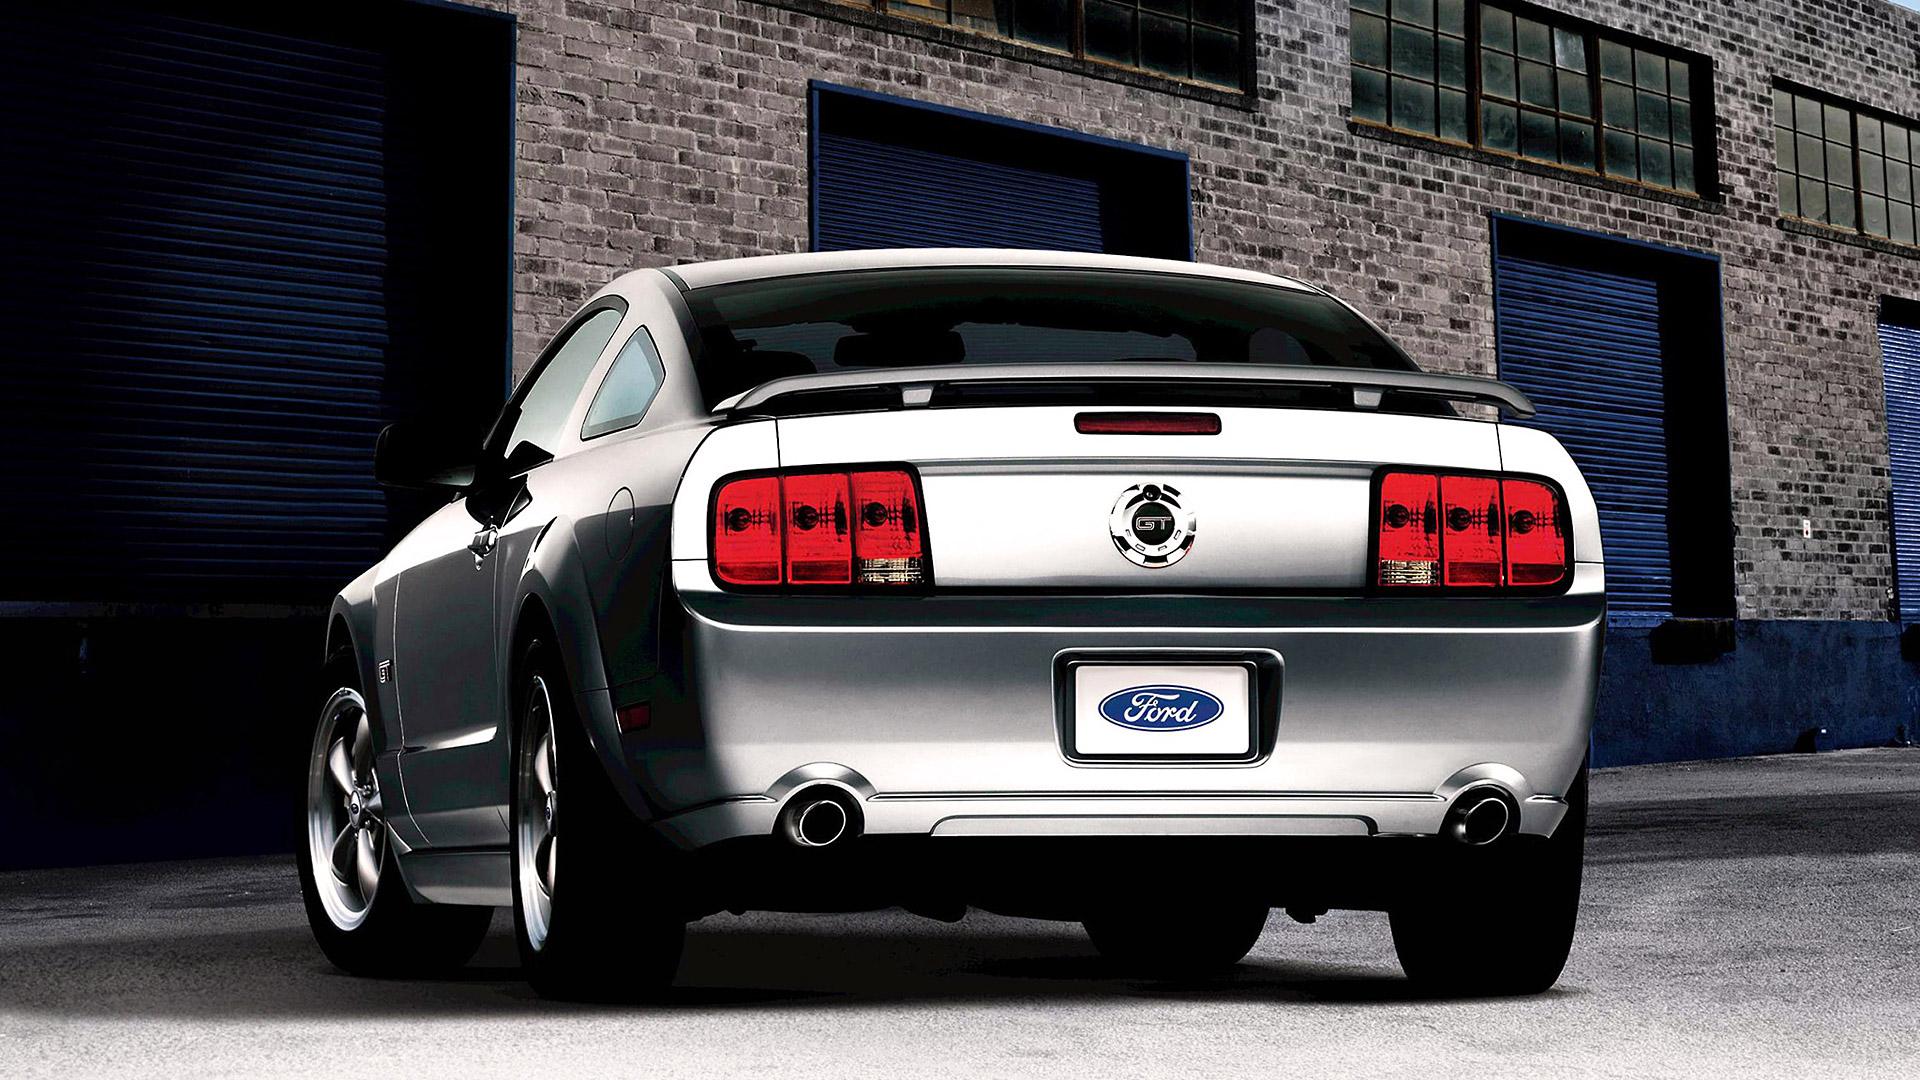 Ford Mustang Gt Wallpaper HD Image Wsupercars V6